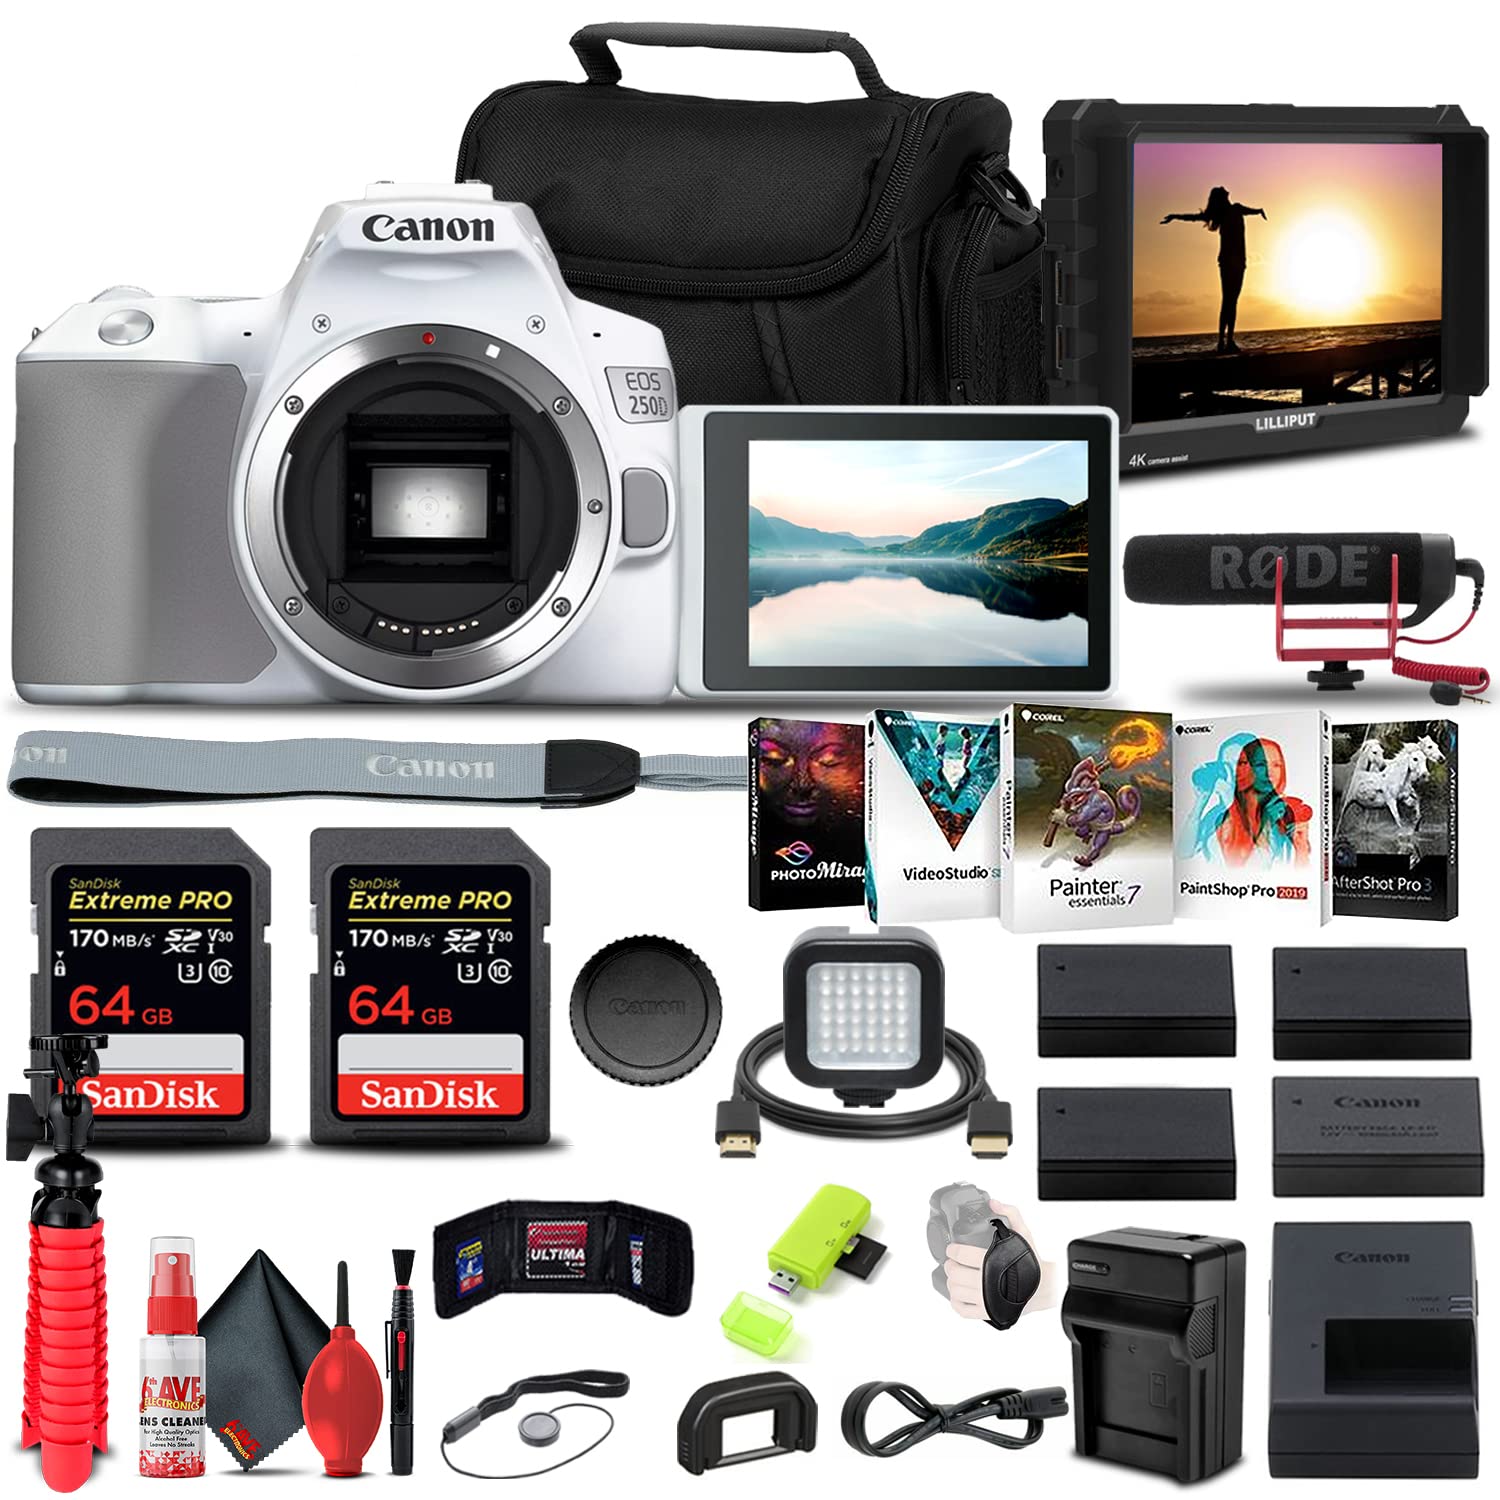 Canon EOS 250D / Rebel SL3 DSLR Camera (Body Only) + (White) 4K Monitor + Pro Mic + 2 x 64GB Memory Card + 3 x LPE17 Battery + External Charger + Card Reader + LED Light + More (Renewed)